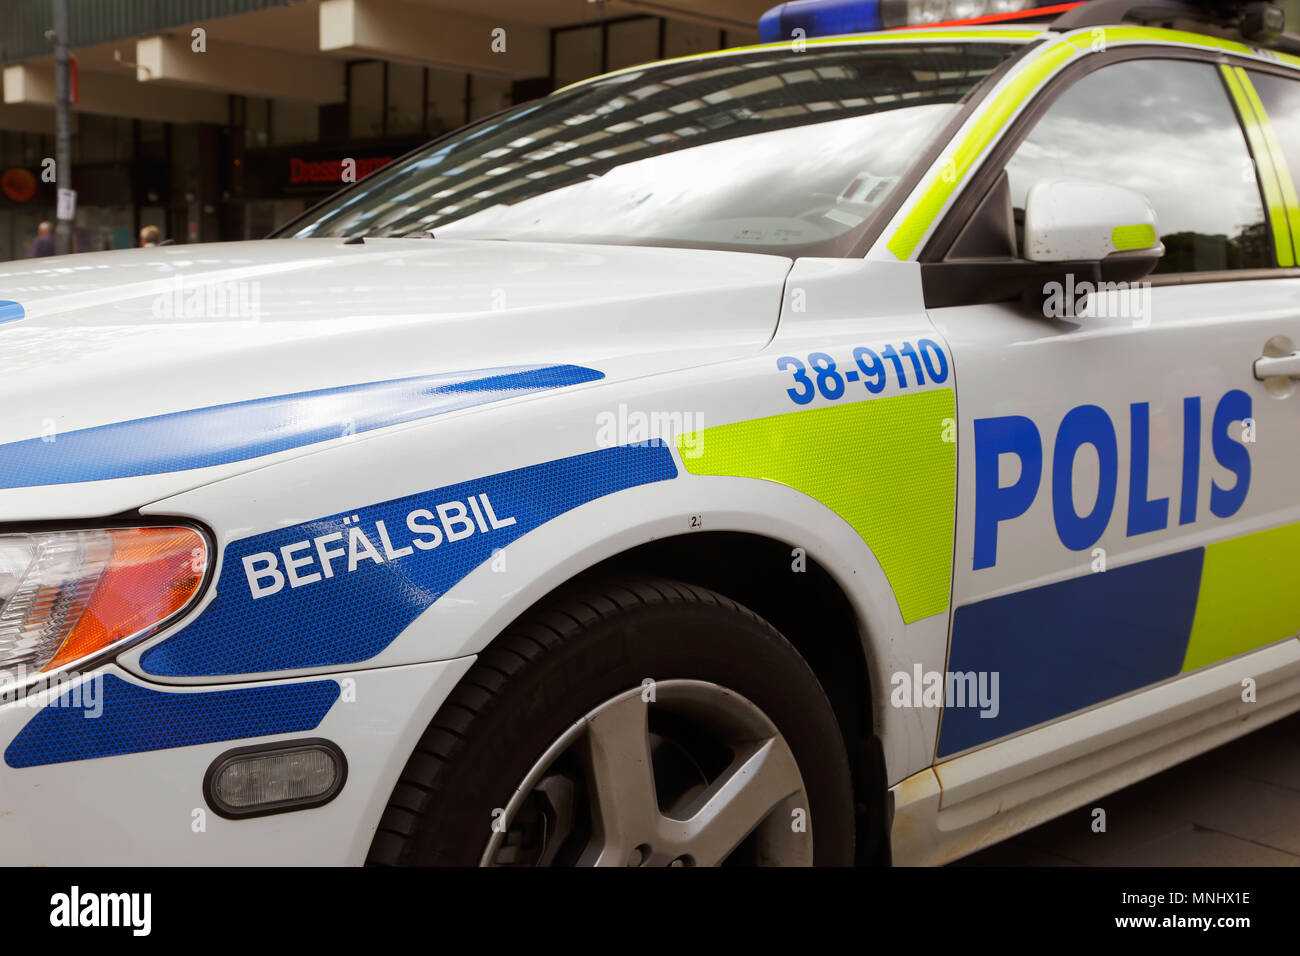 Sodertalje, Sweden - June 8, 2013: Close up of a Swedish police car used by commanding officer (befalsbil). Stock Photo